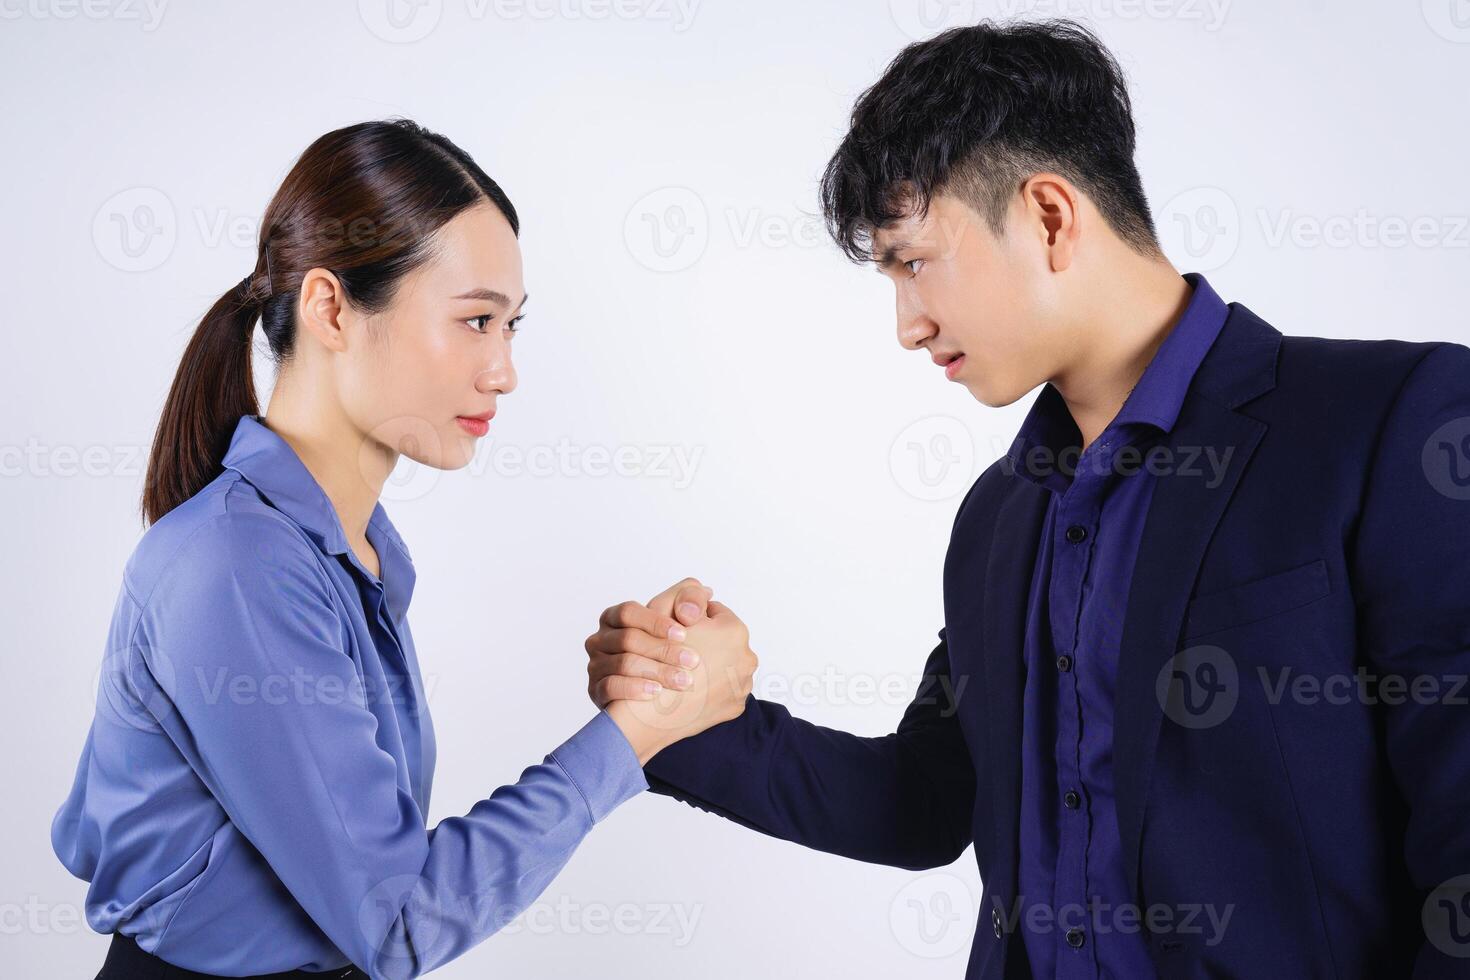 Photo of two young Asian business people on white background